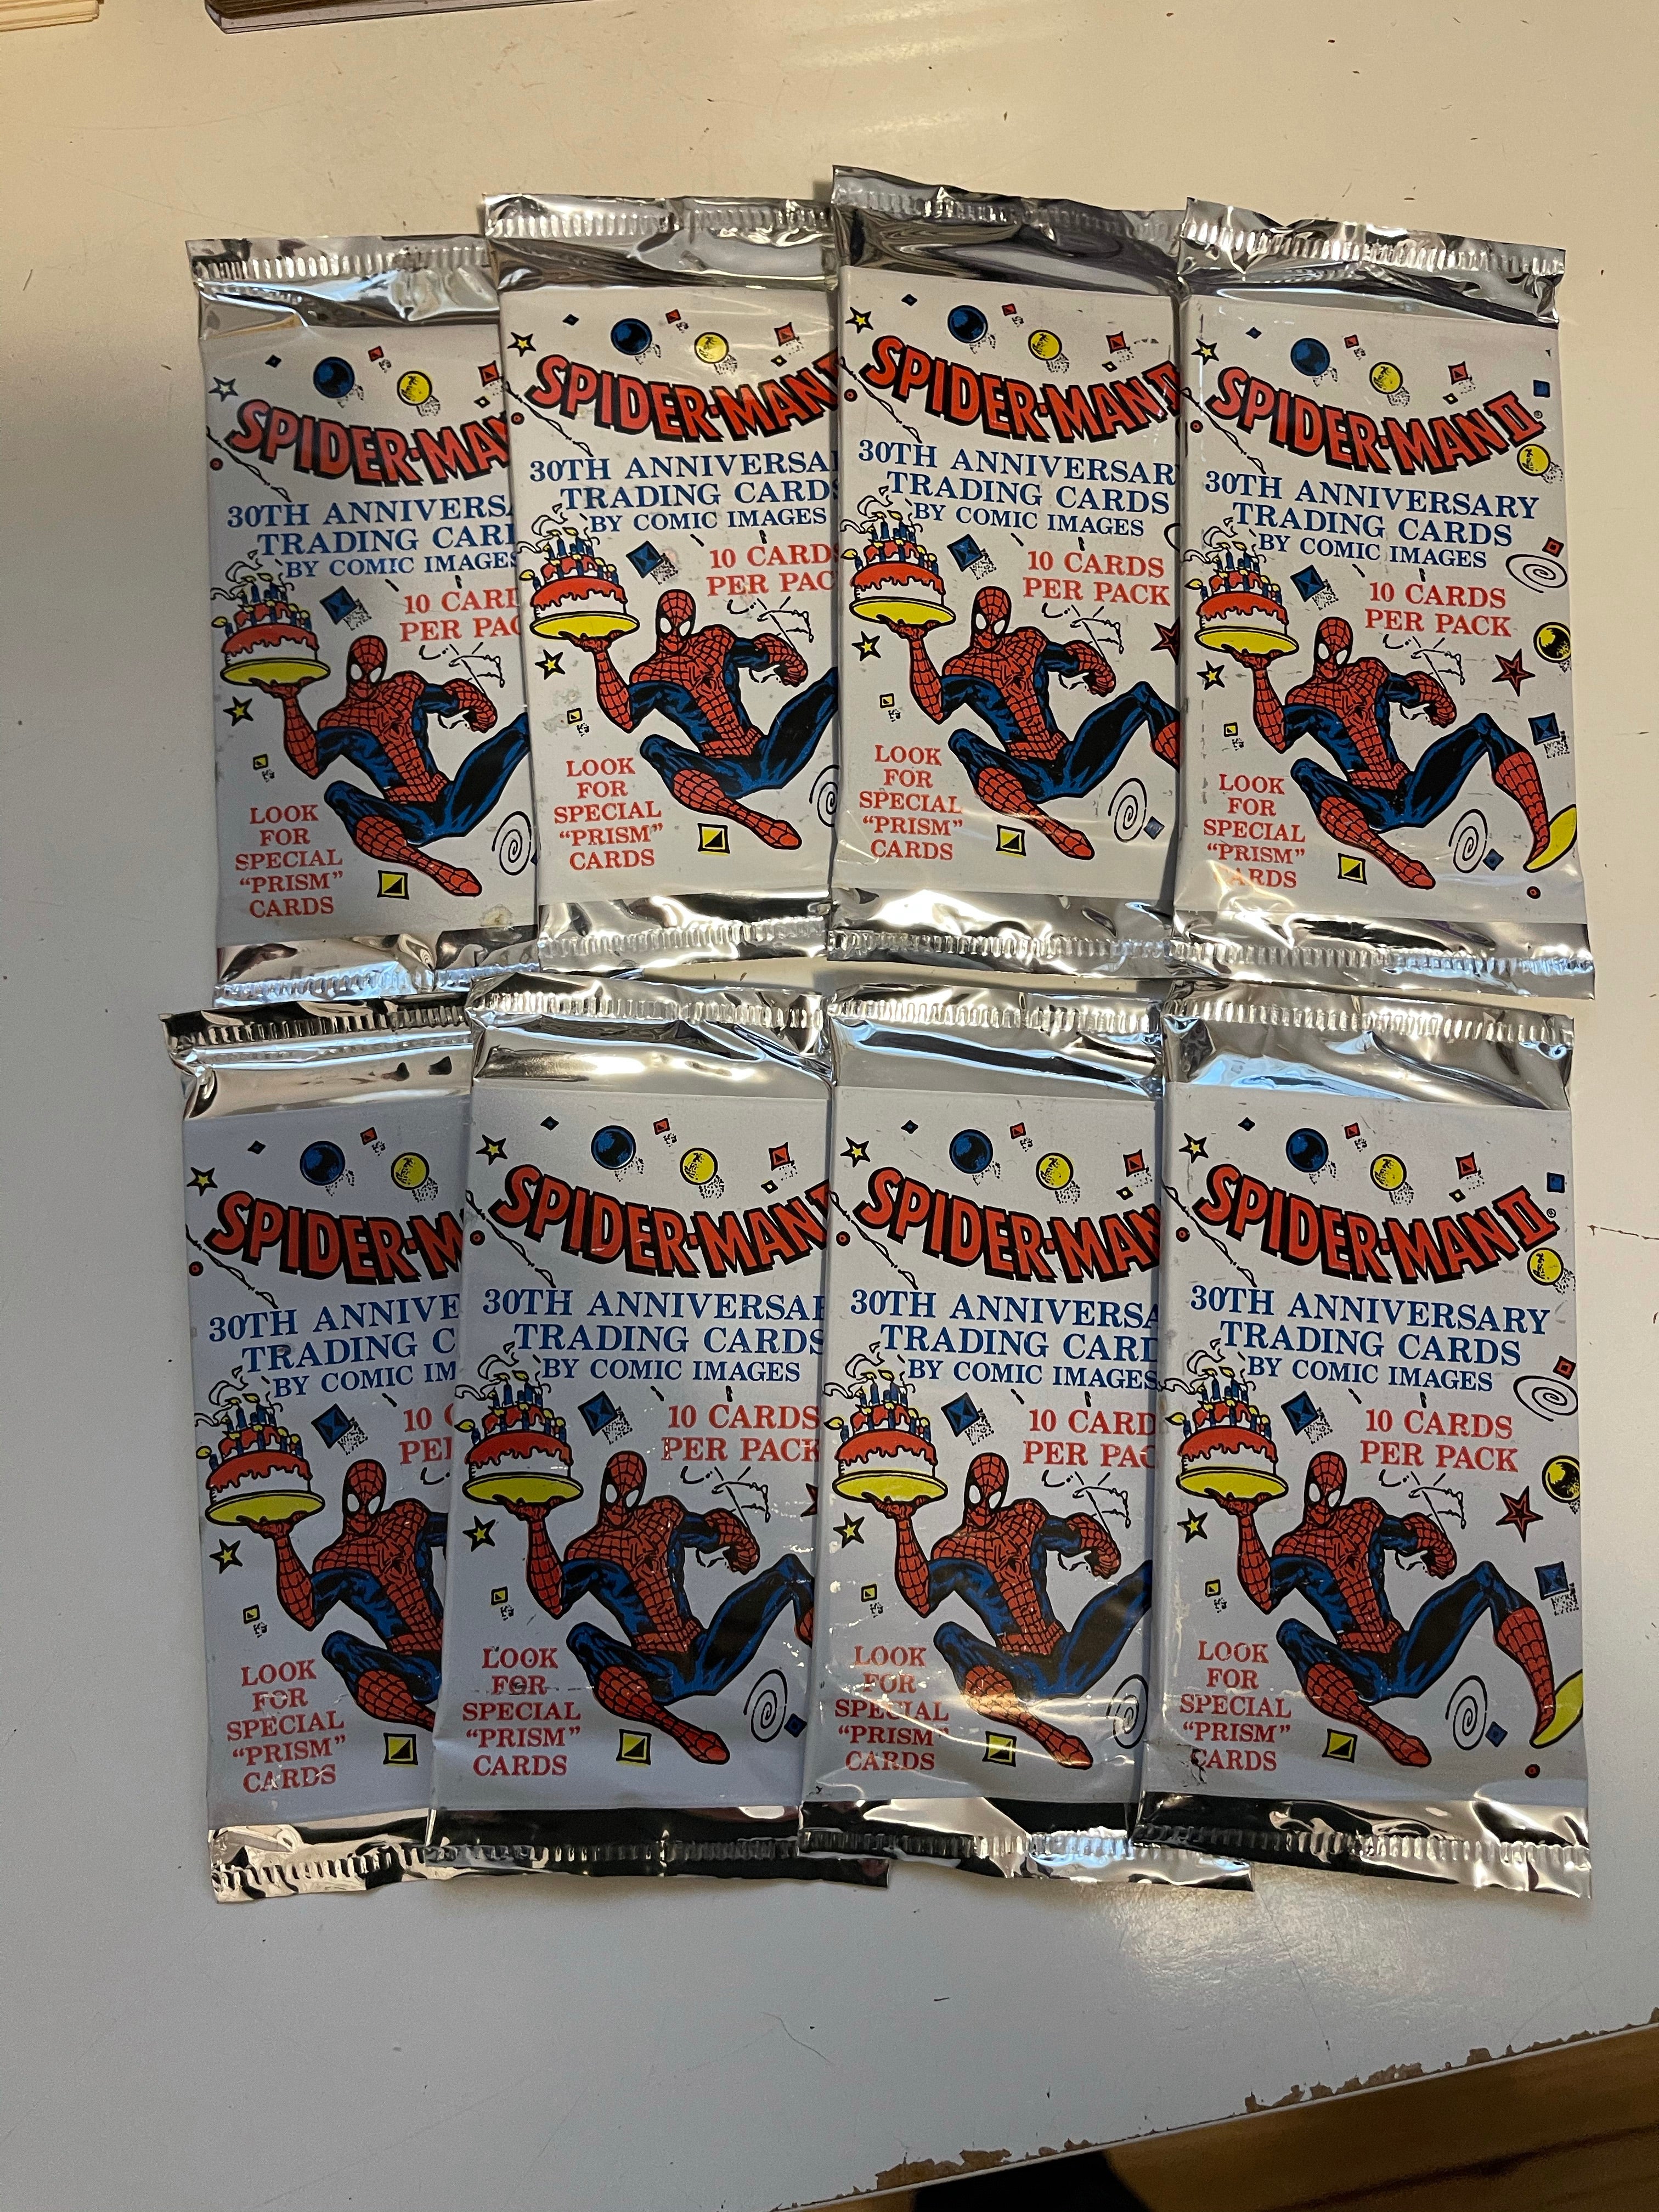 Spider-Man 2 anniversary 8 sealed card packs from 1992